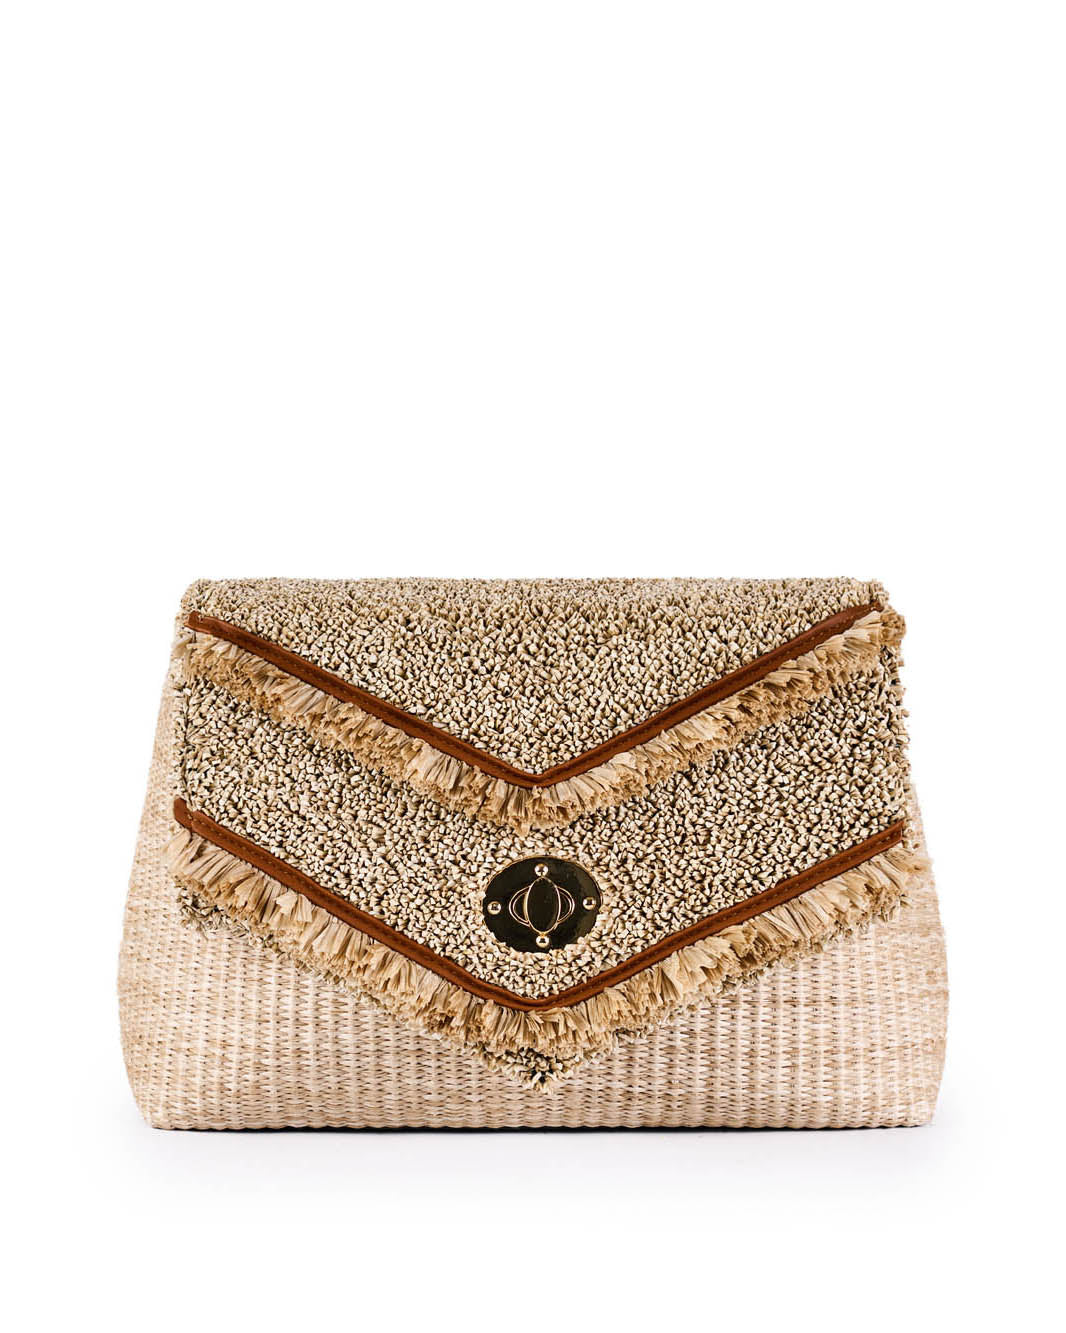 Woven straw clutch bag with fringe details and decorative clasp